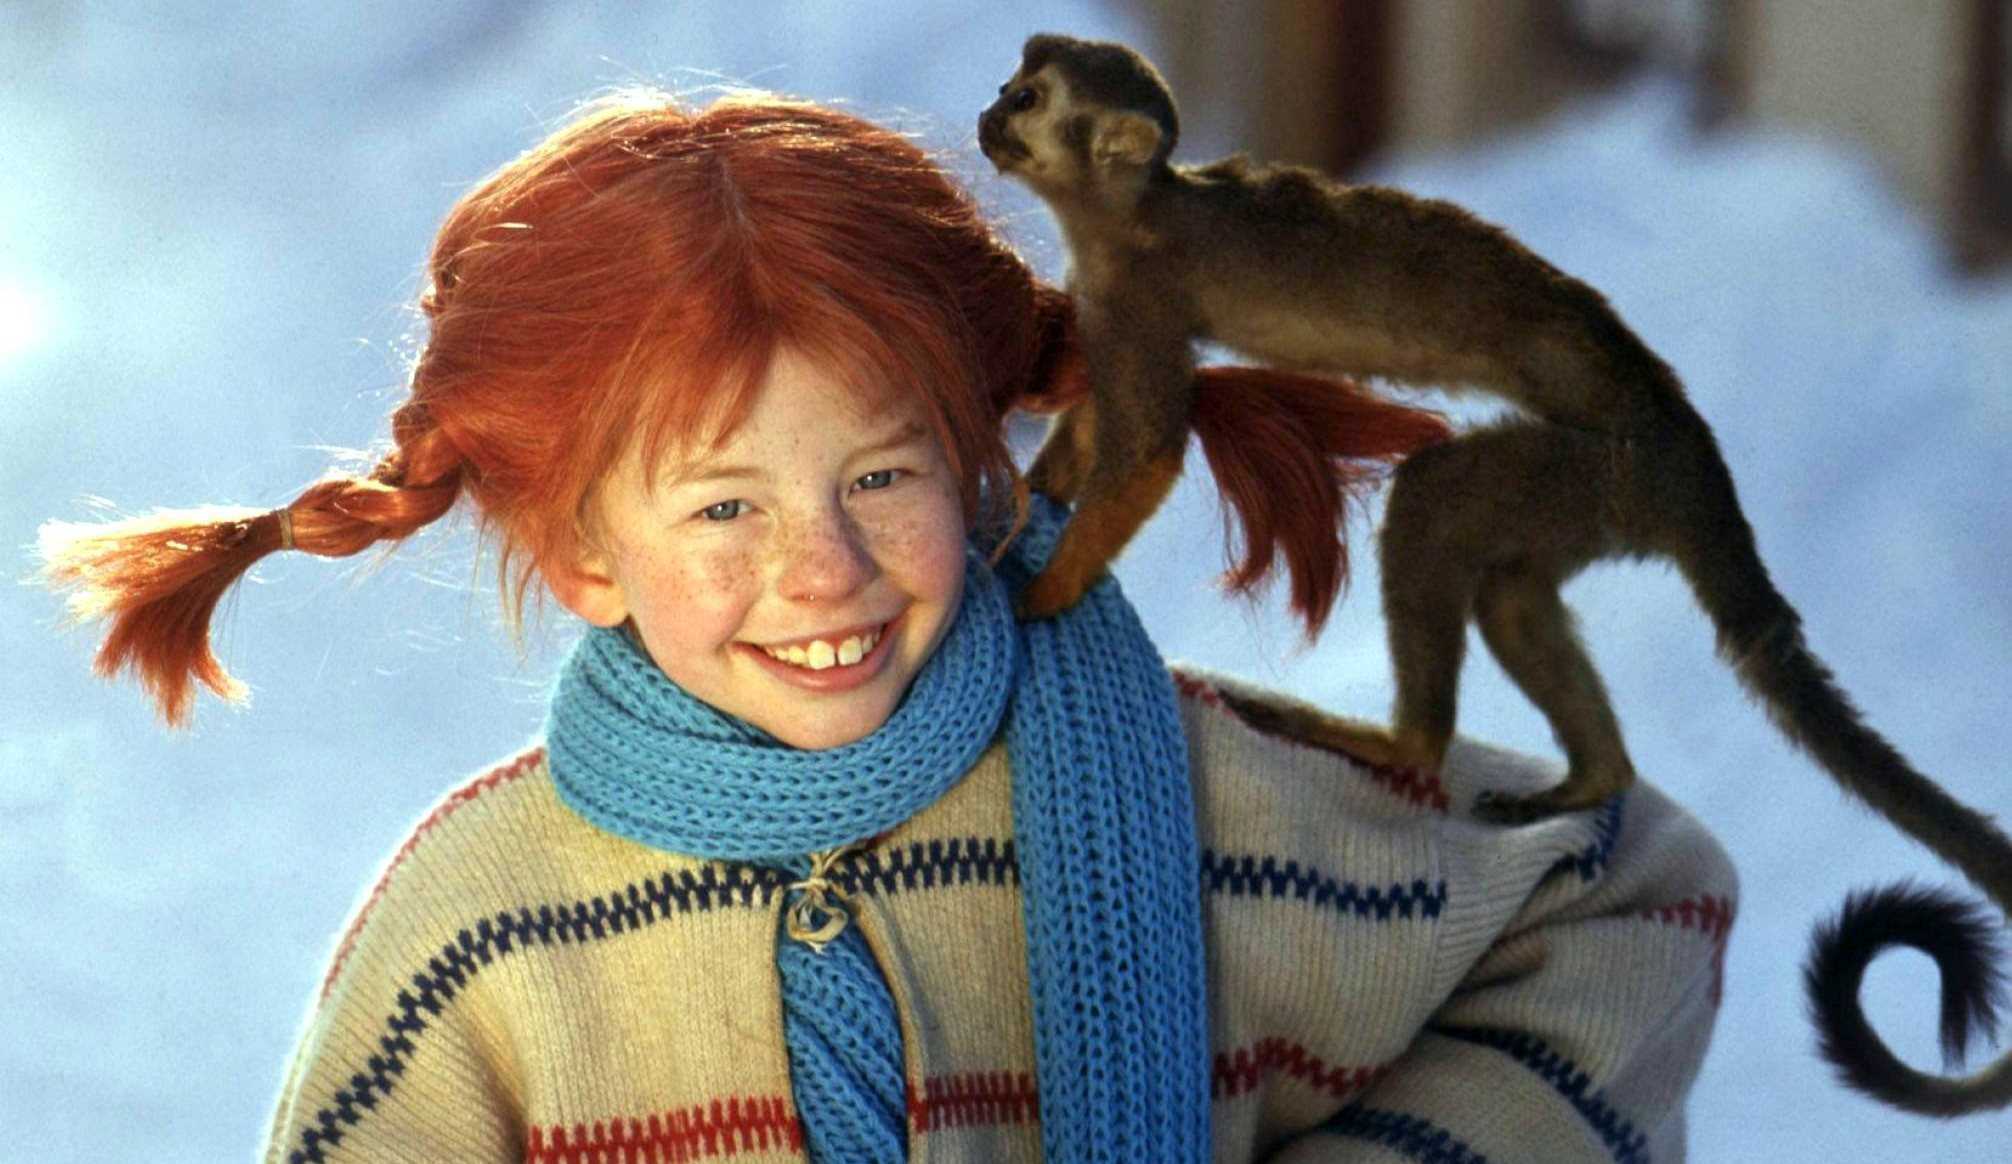 parrucca pippi calzelunghe adulto